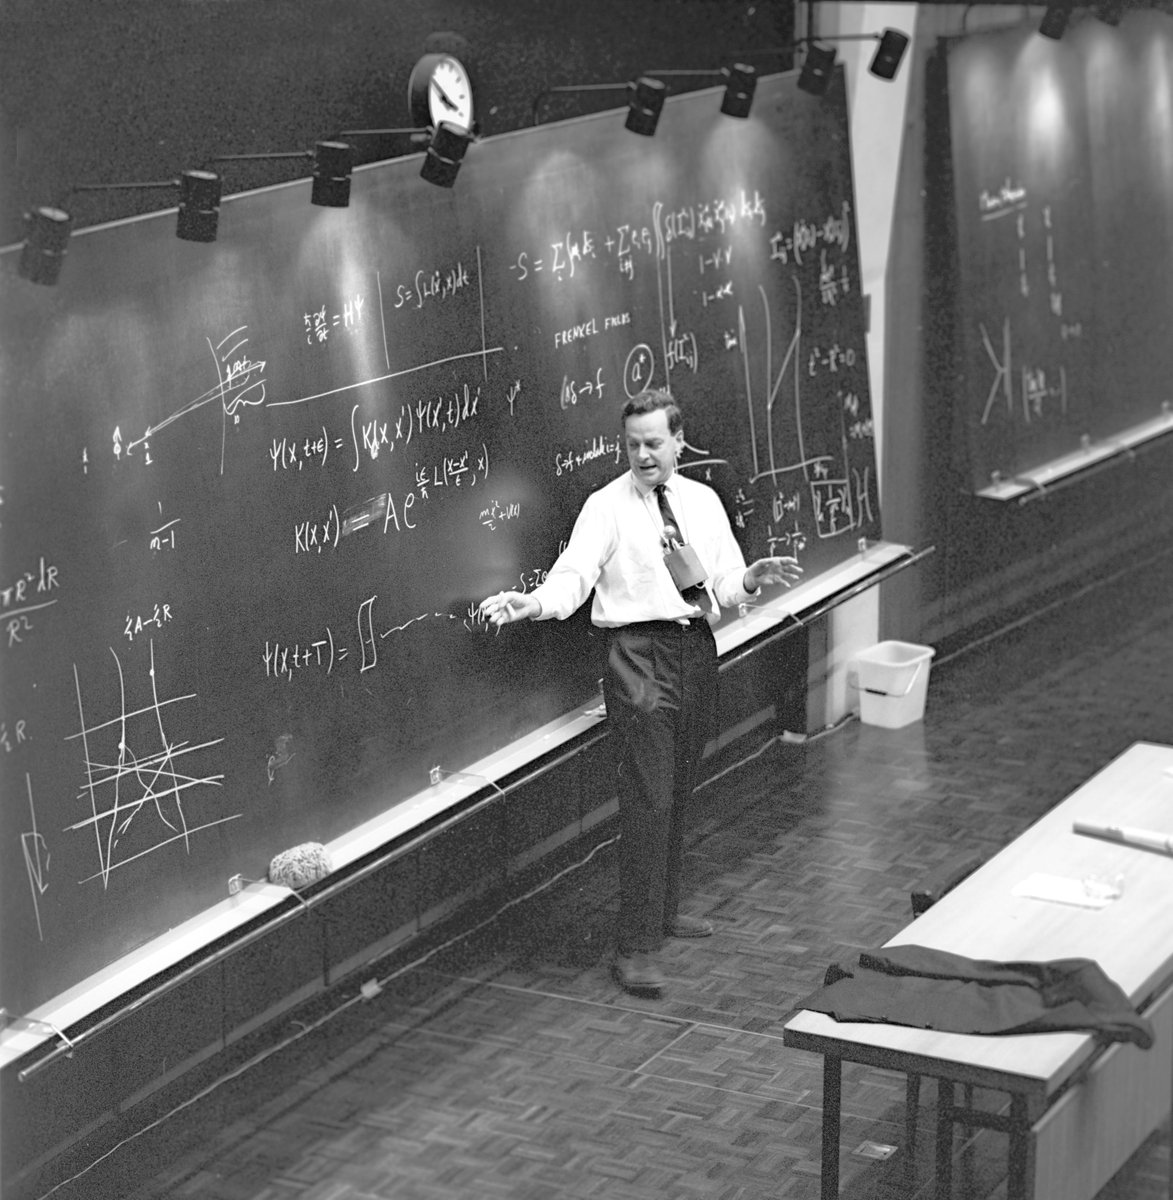 'I would rather have questions that can't be answered, than answers that can't be questioned...' Richard Feynman #botd Along with his pioneering work in theoretical physics, in 1959 Feynman first discussed concepts that seeded nanotechnology.